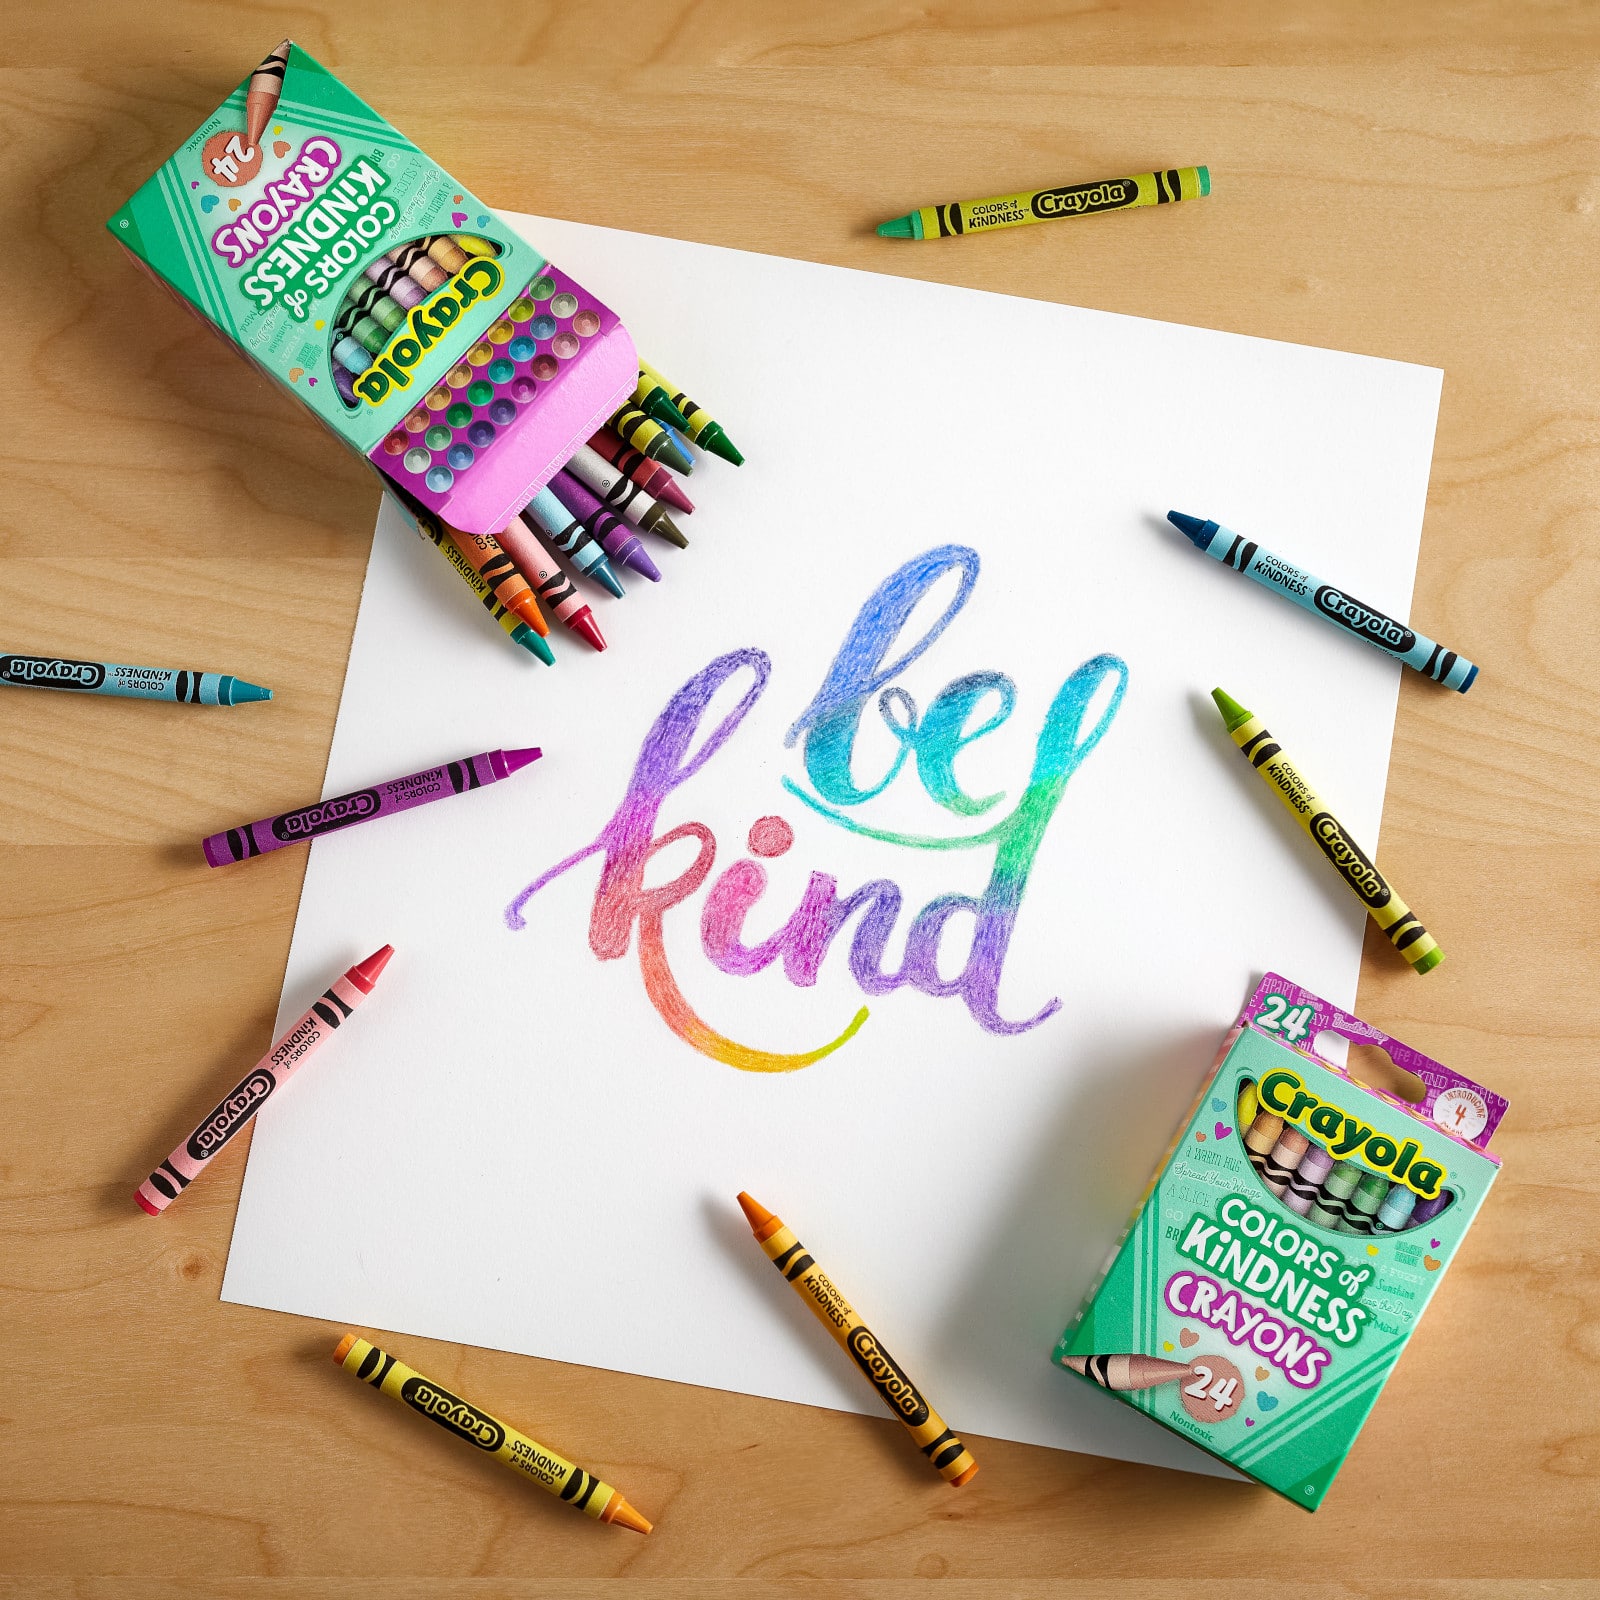 Crayola Colors of Kindness Crayons, Assorted, 24/Pack